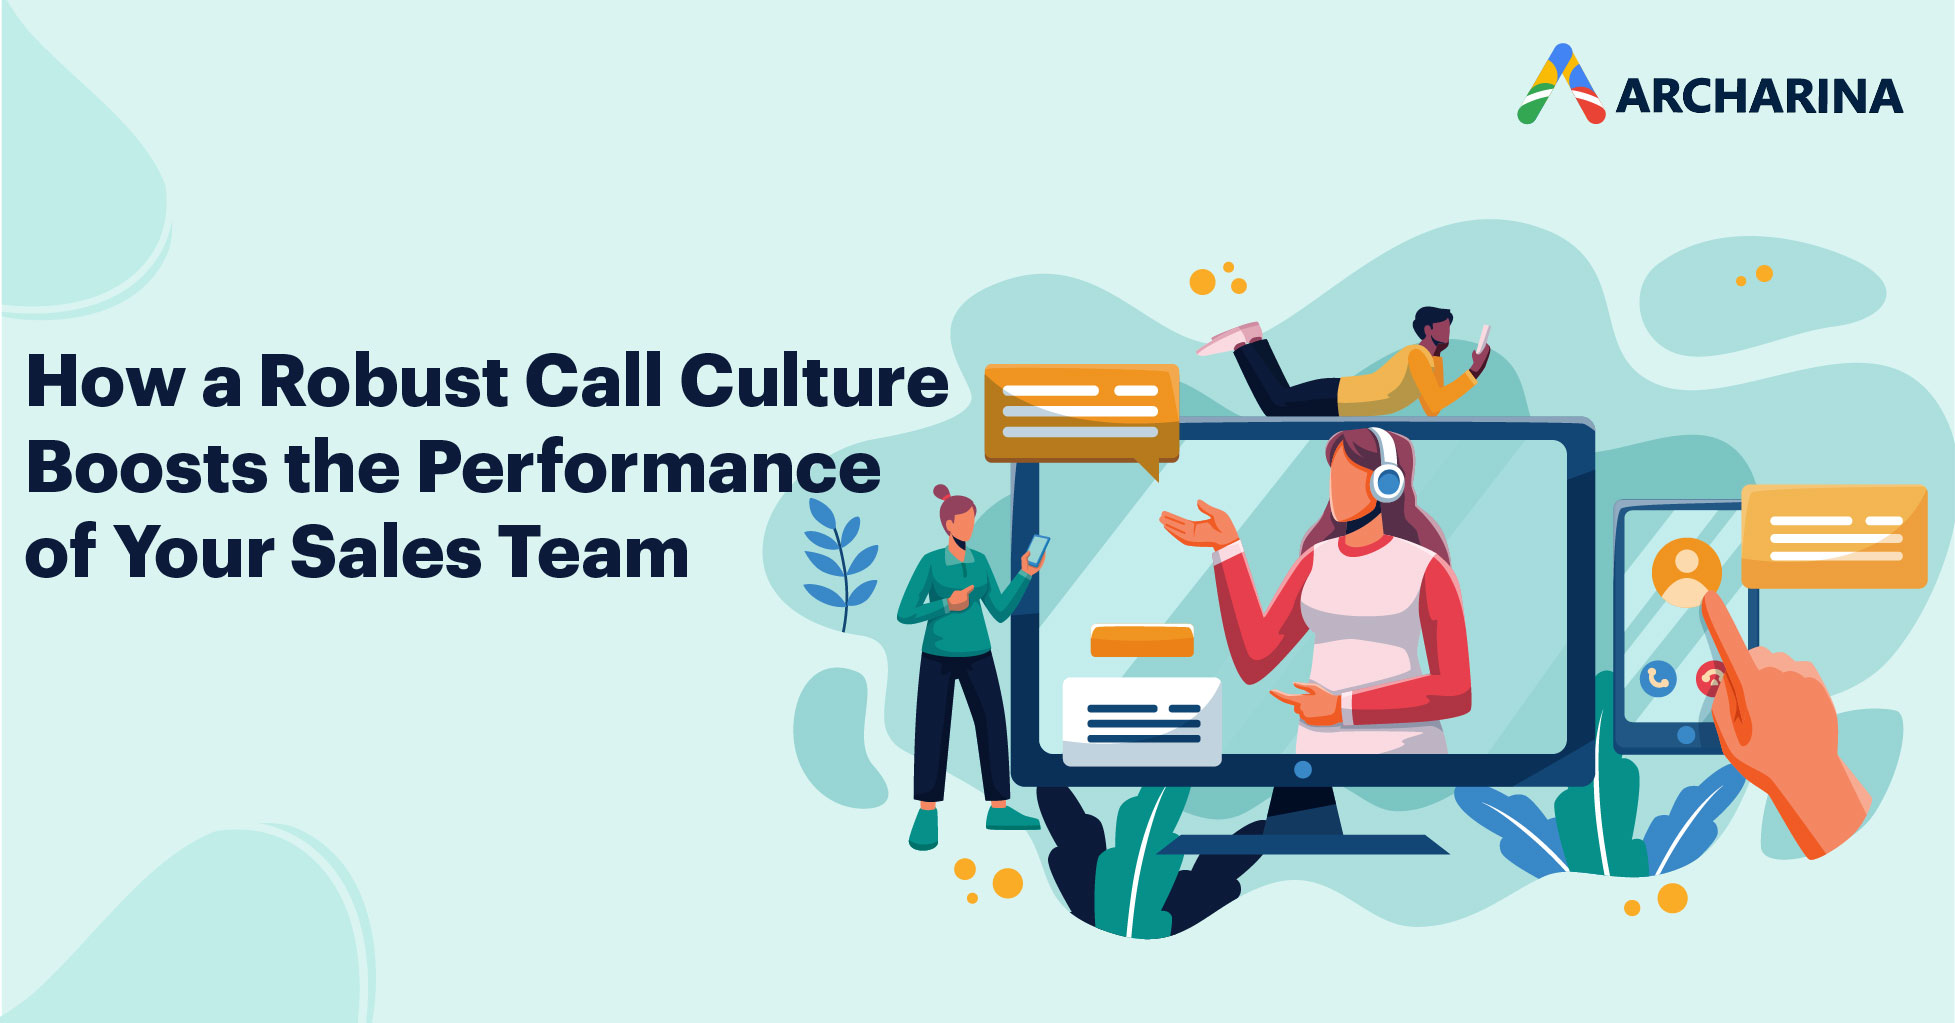 How a Robust Call Culture Boosts the Performance of Your Sales Team